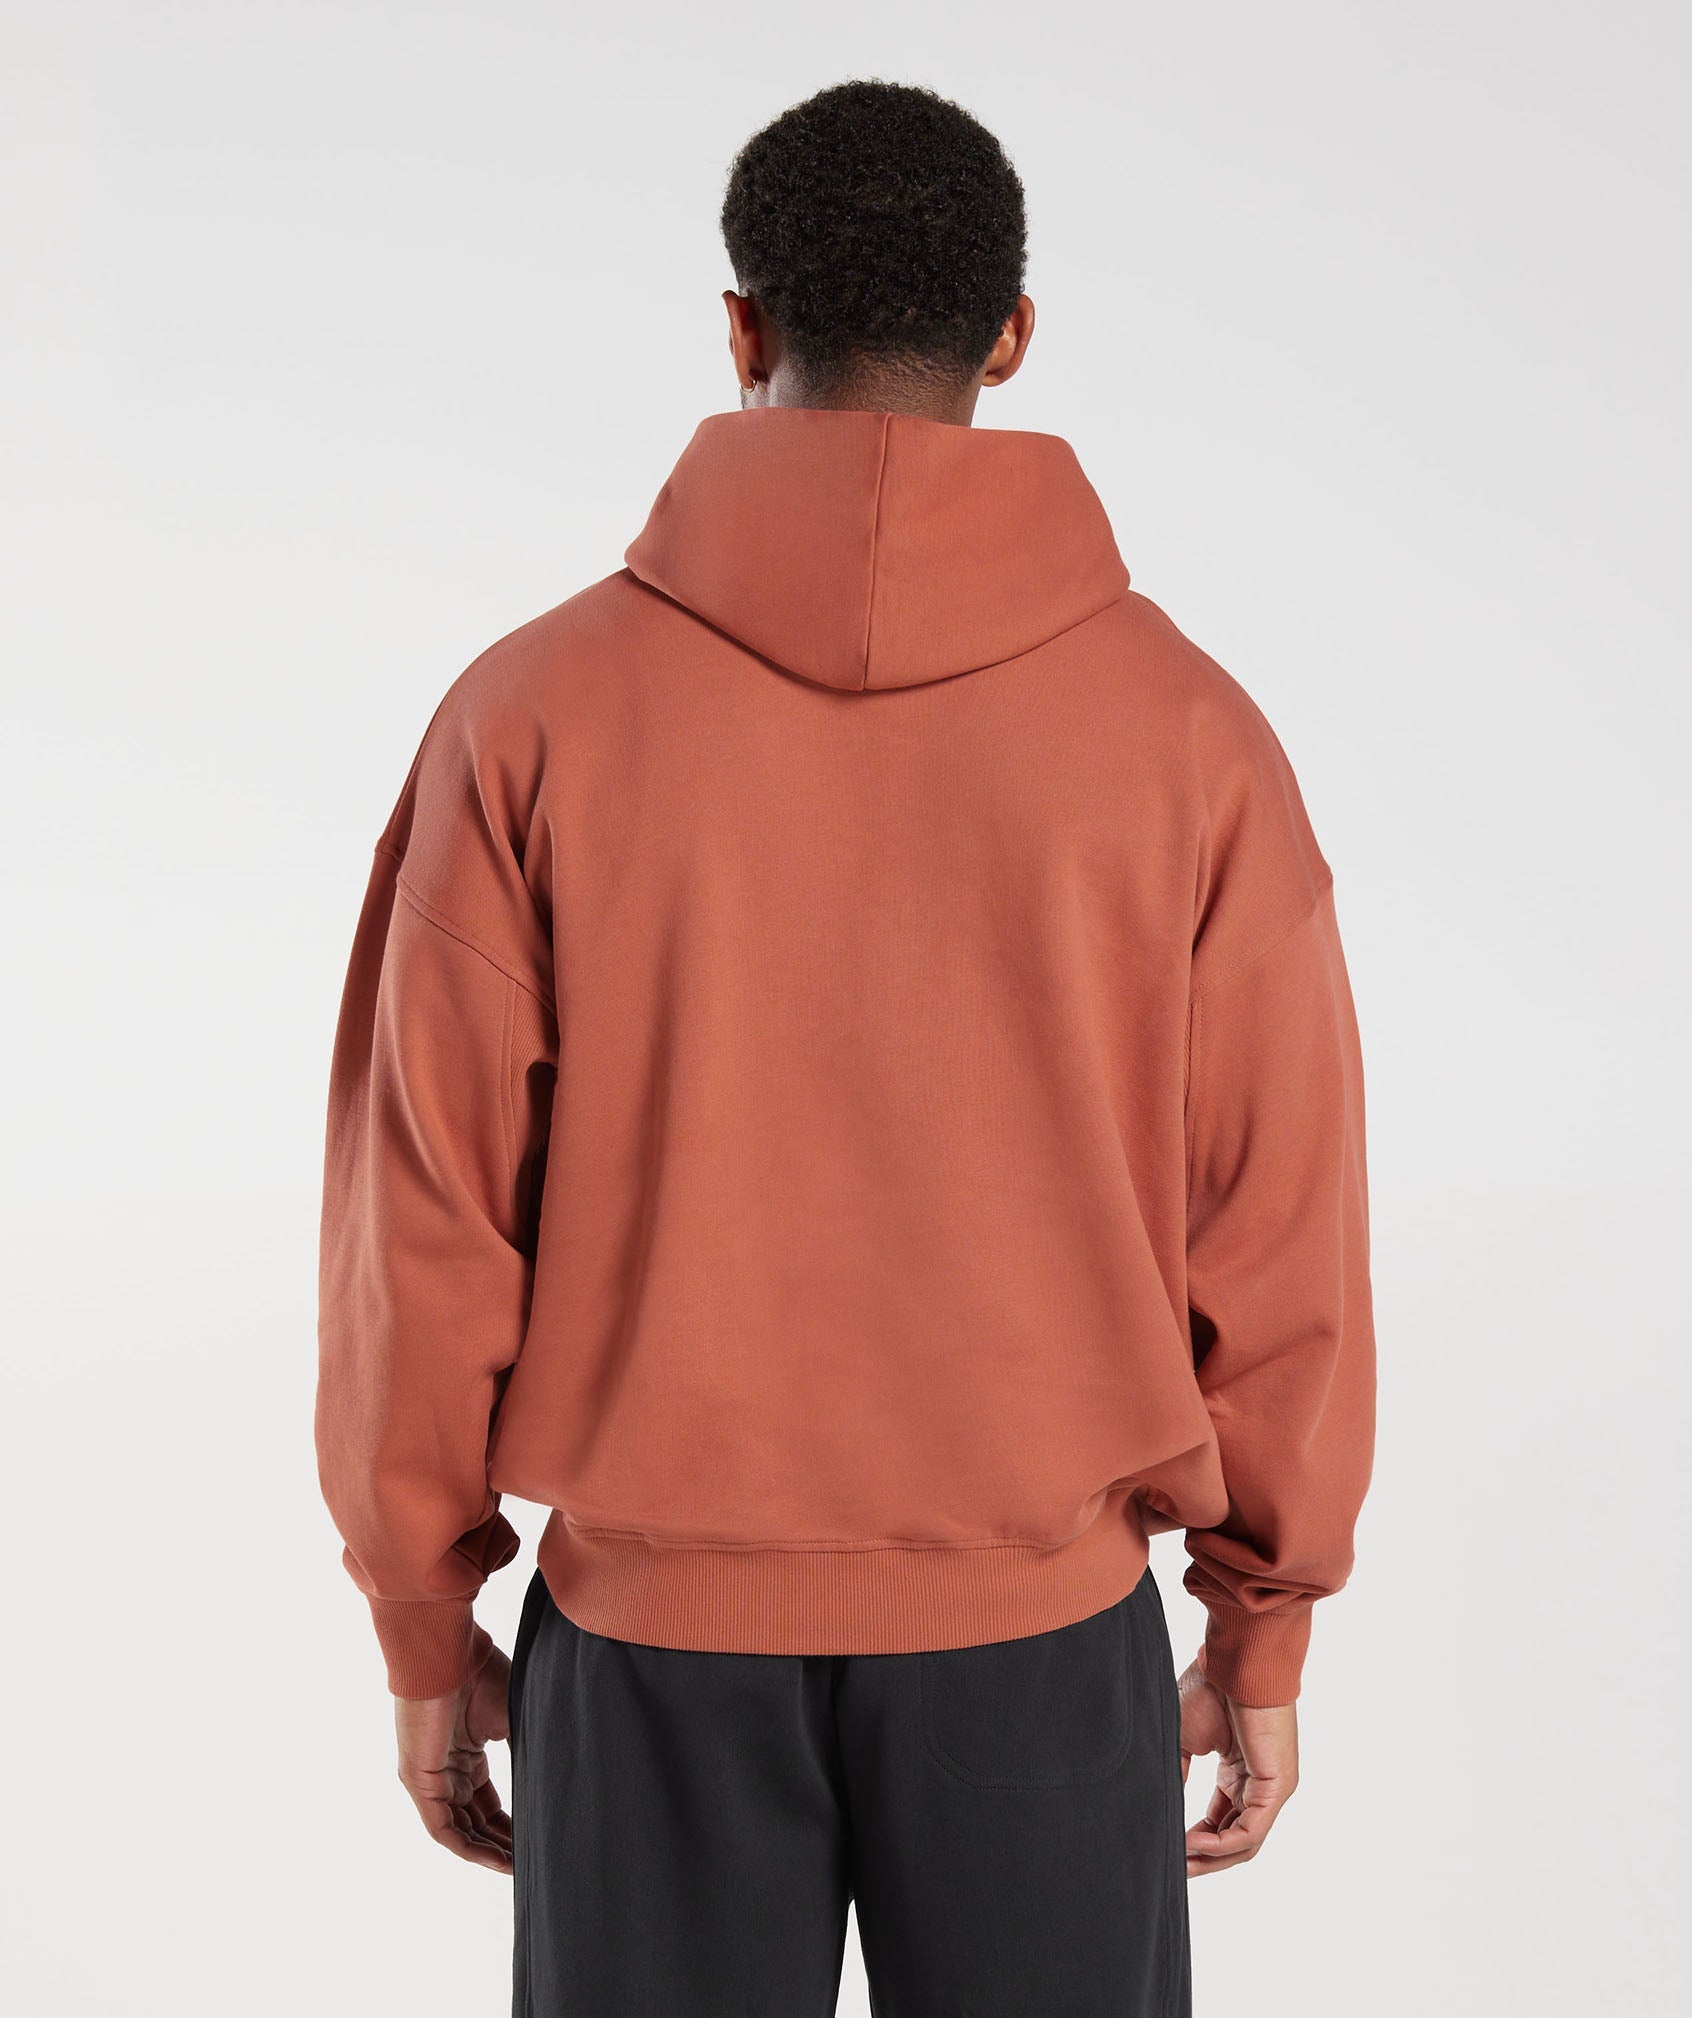 Rest Day Essentials Hoodie in Persimmon Red - view 2